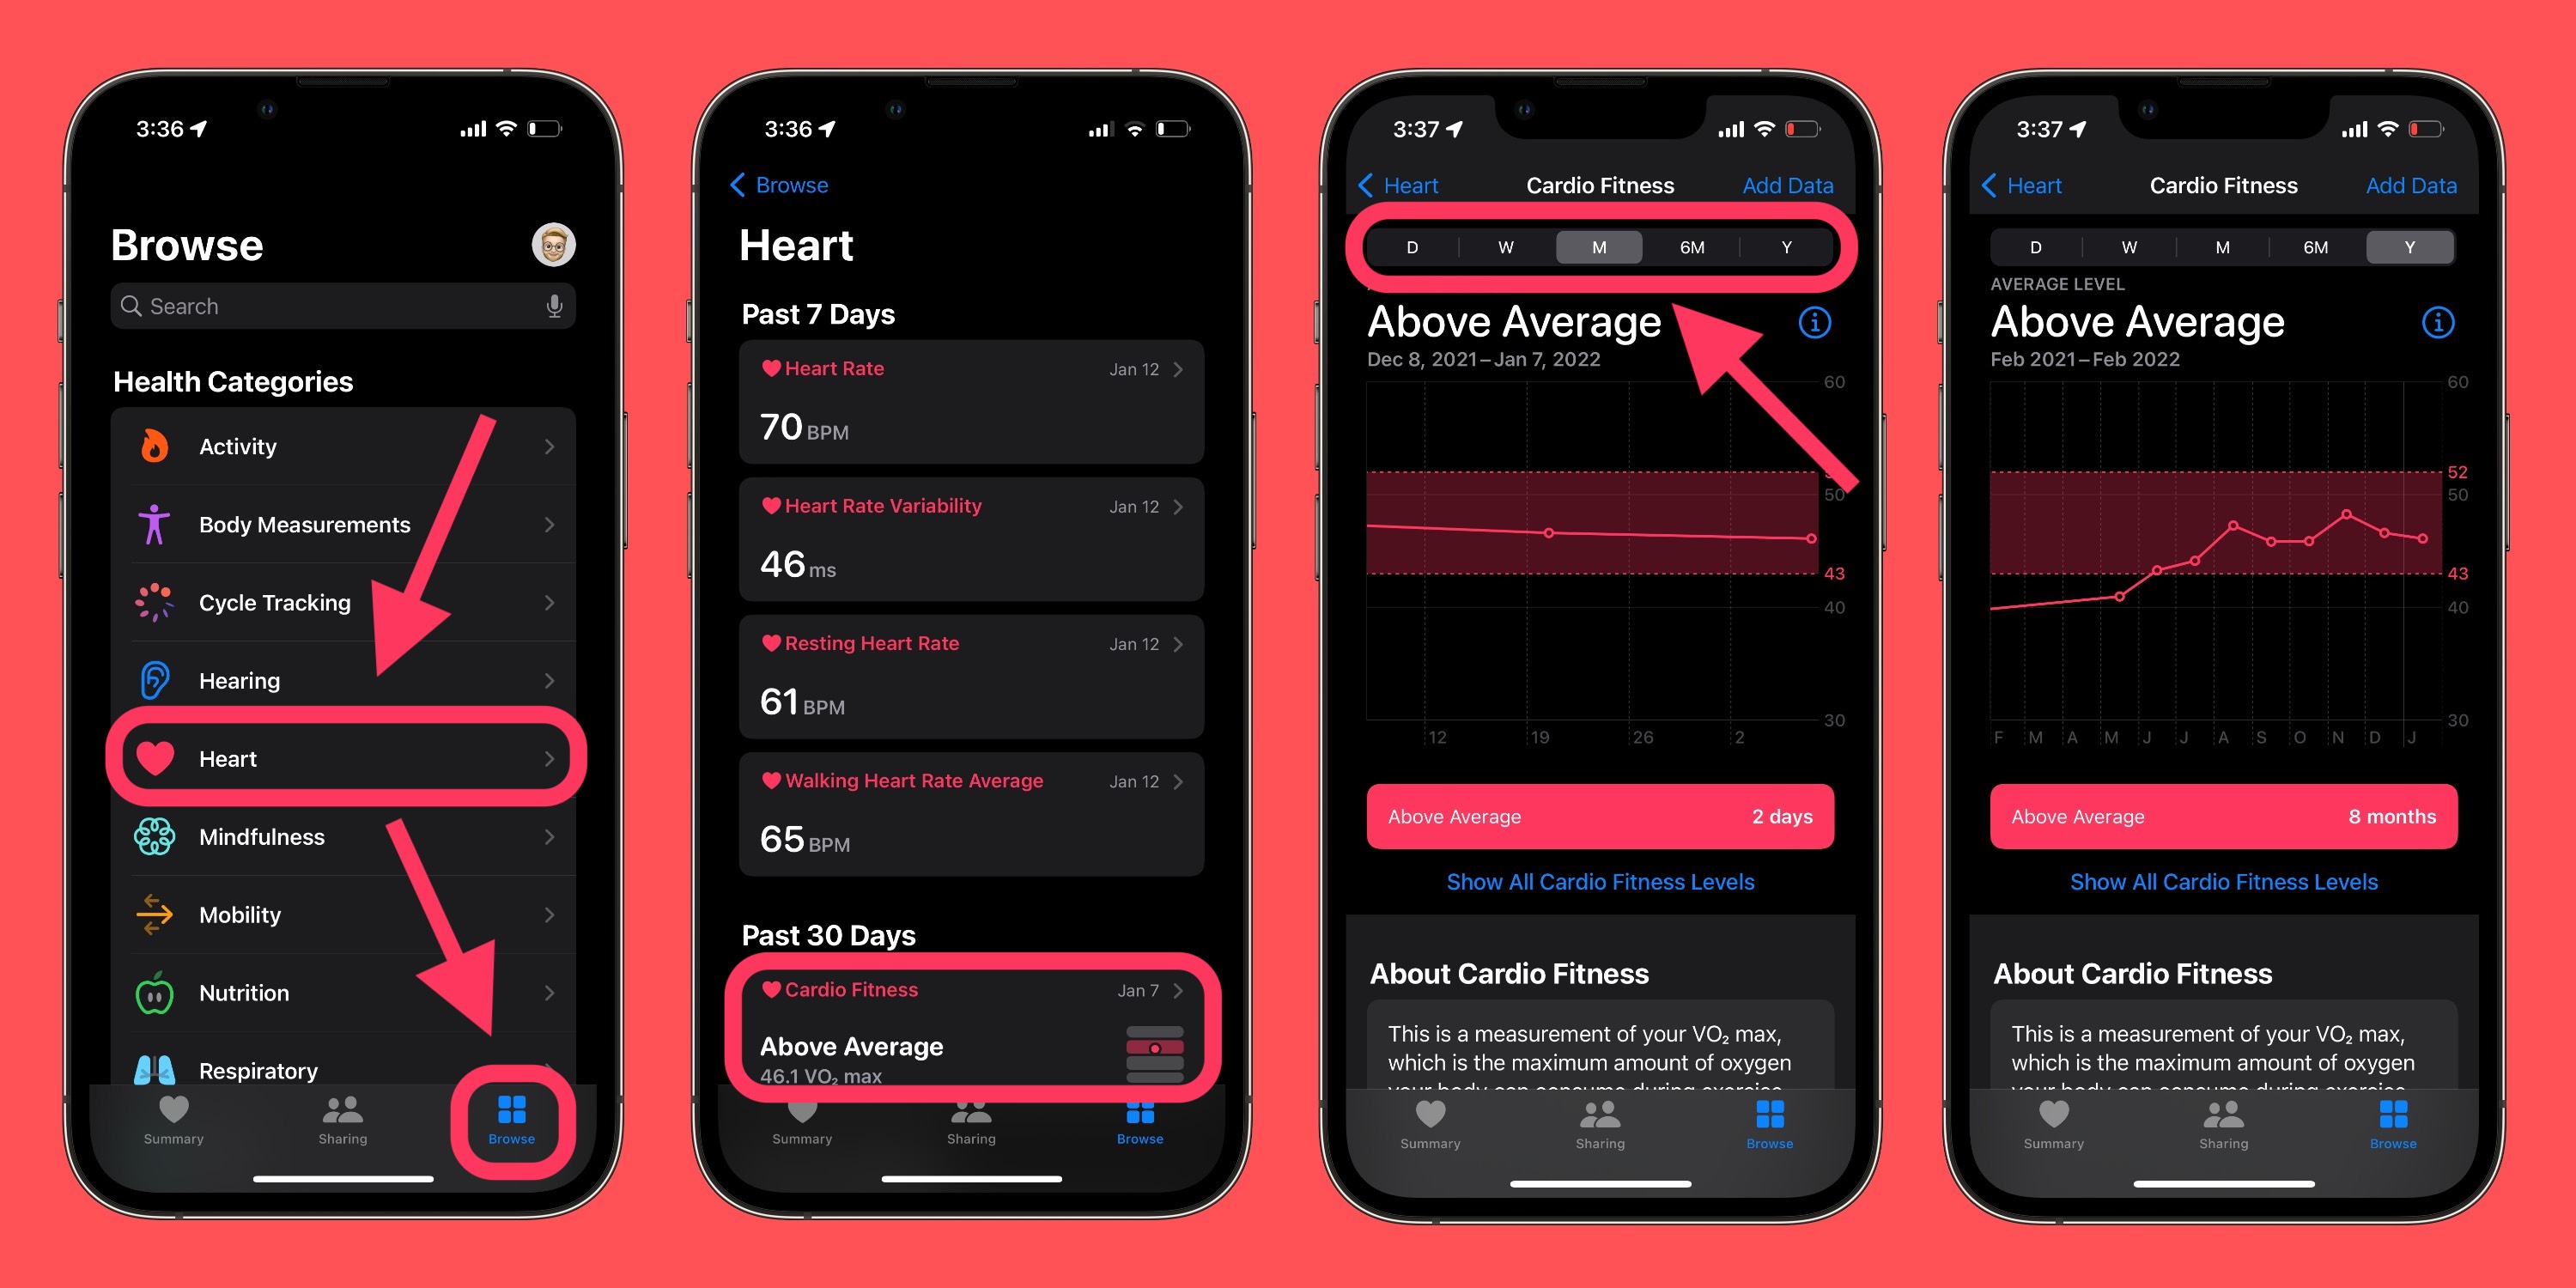 How to view VO2 Max with Apple Watch and iPhone walkthrough 2